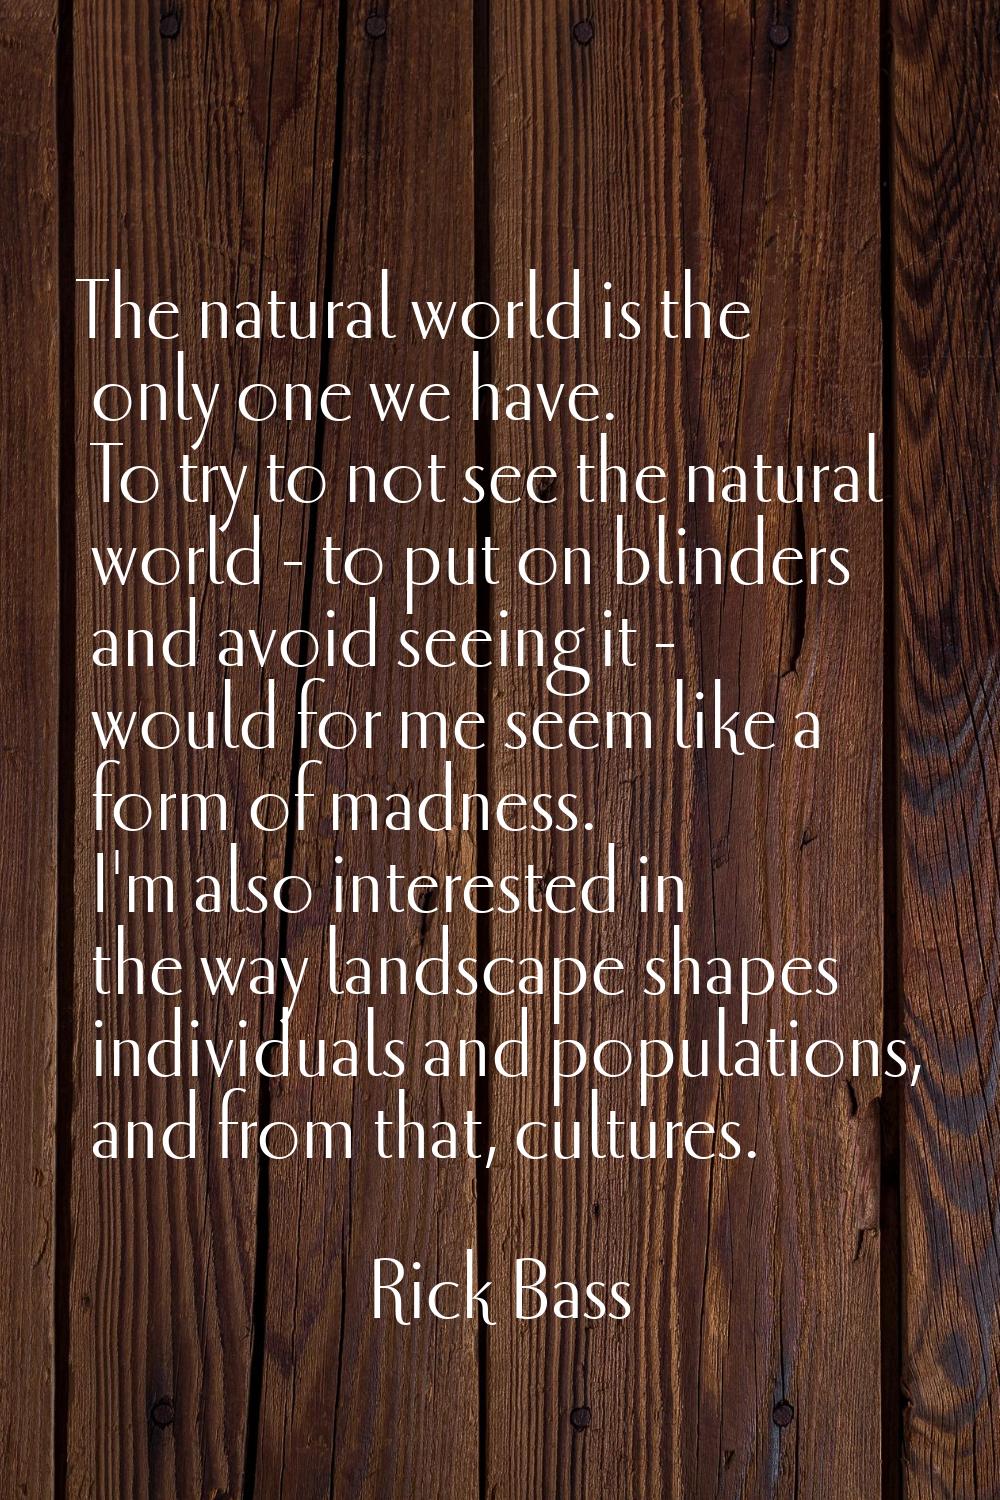 The natural world is the only one we have. To try to not see the natural world - to put on blinders